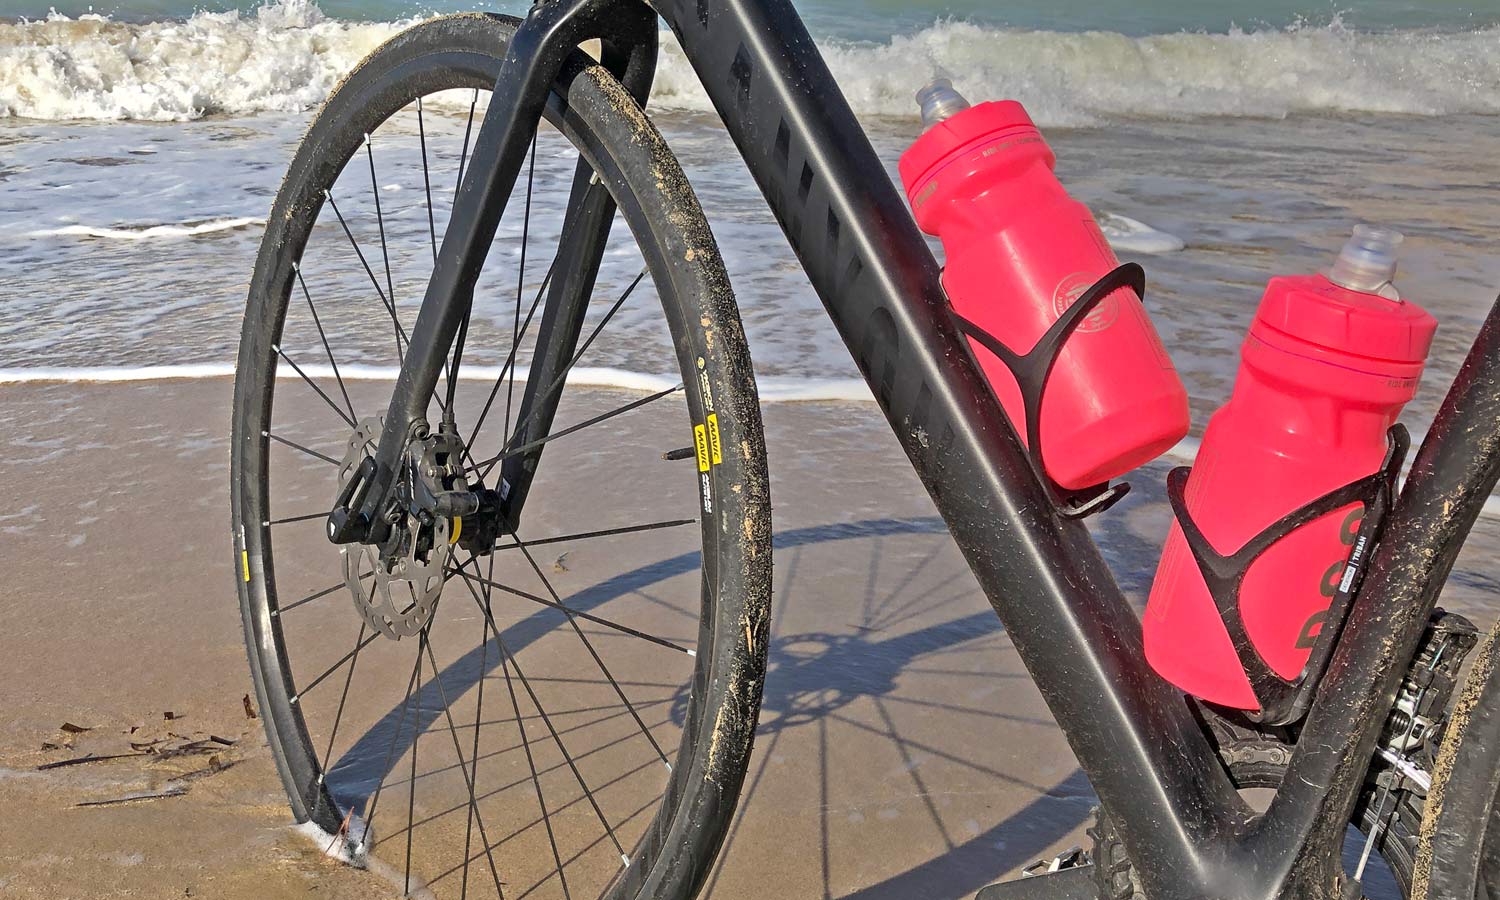 Review: Super low-cost Decathlon Triban bottle cage grips bidons like a vise